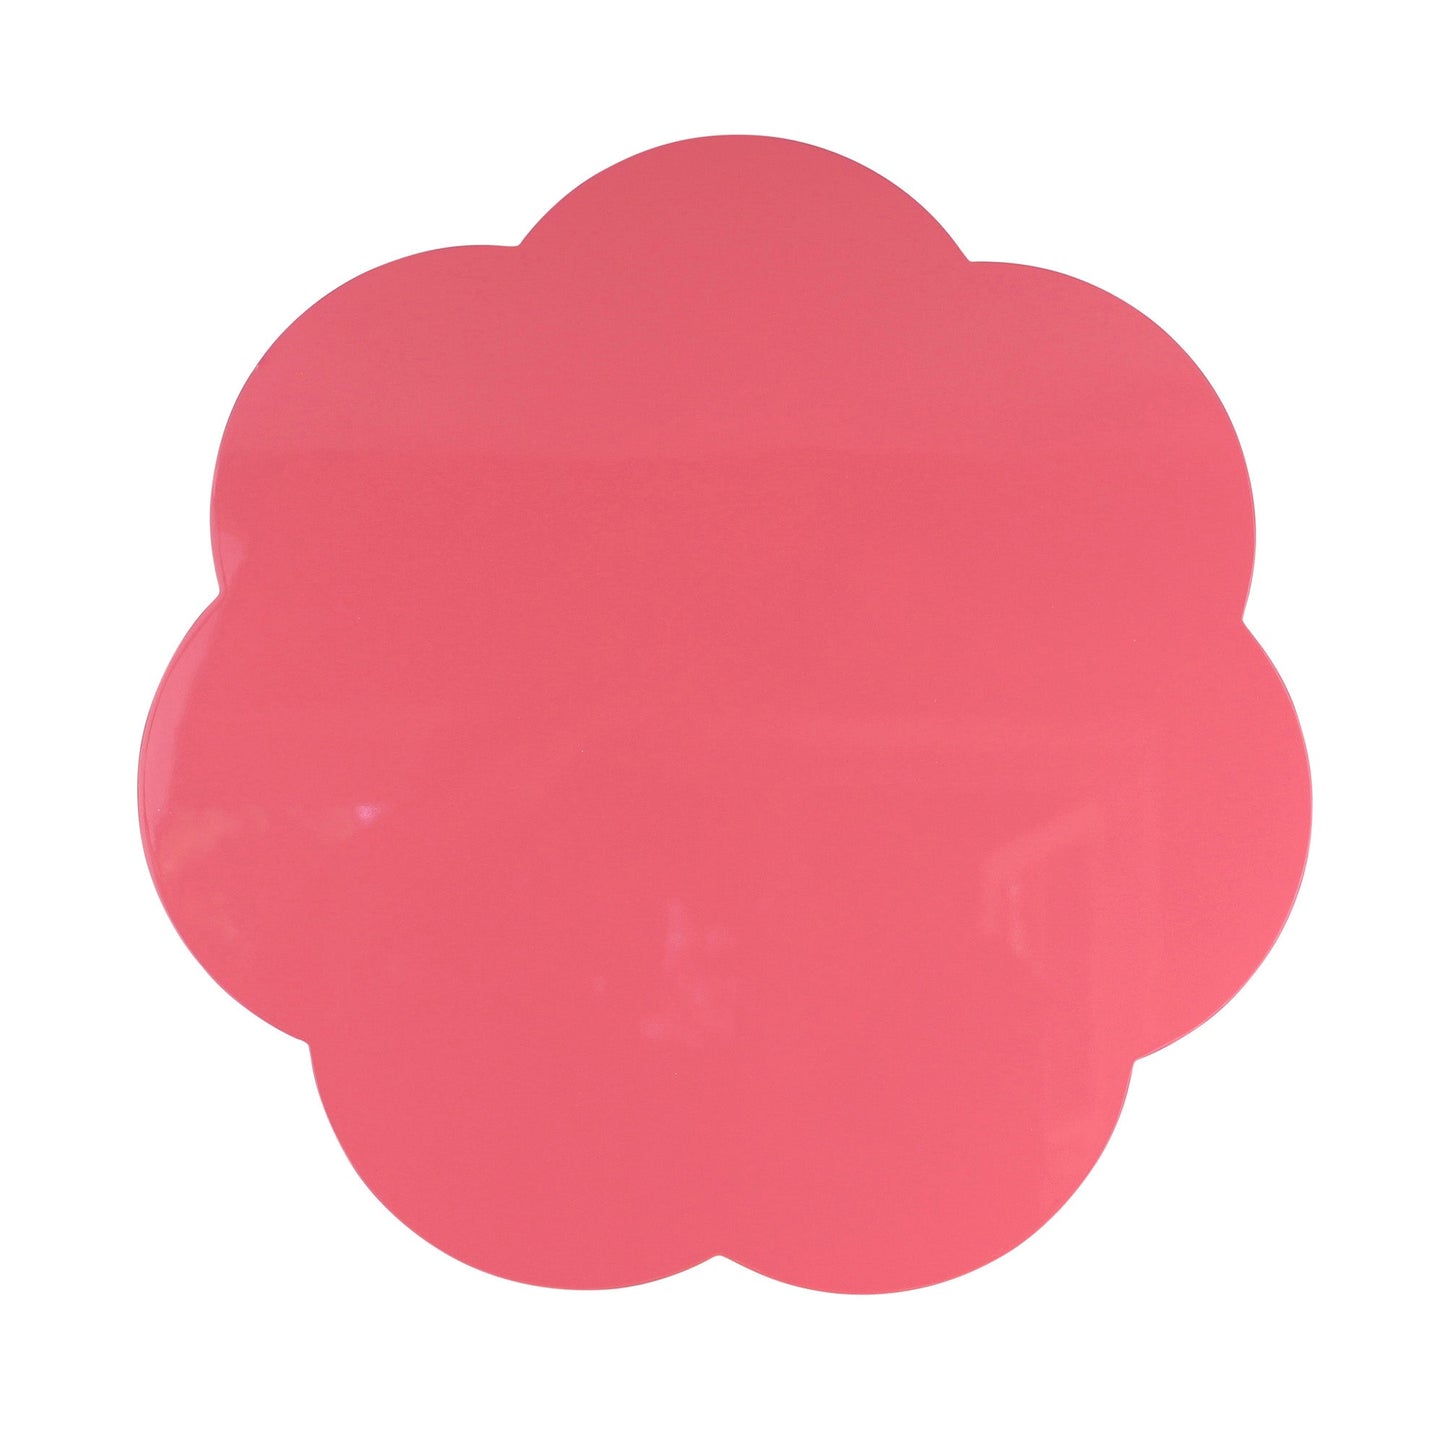 Watermelon Pink Large Scallop Lacquer Placemats – Set of 4 - Addison Ross Ltd UK